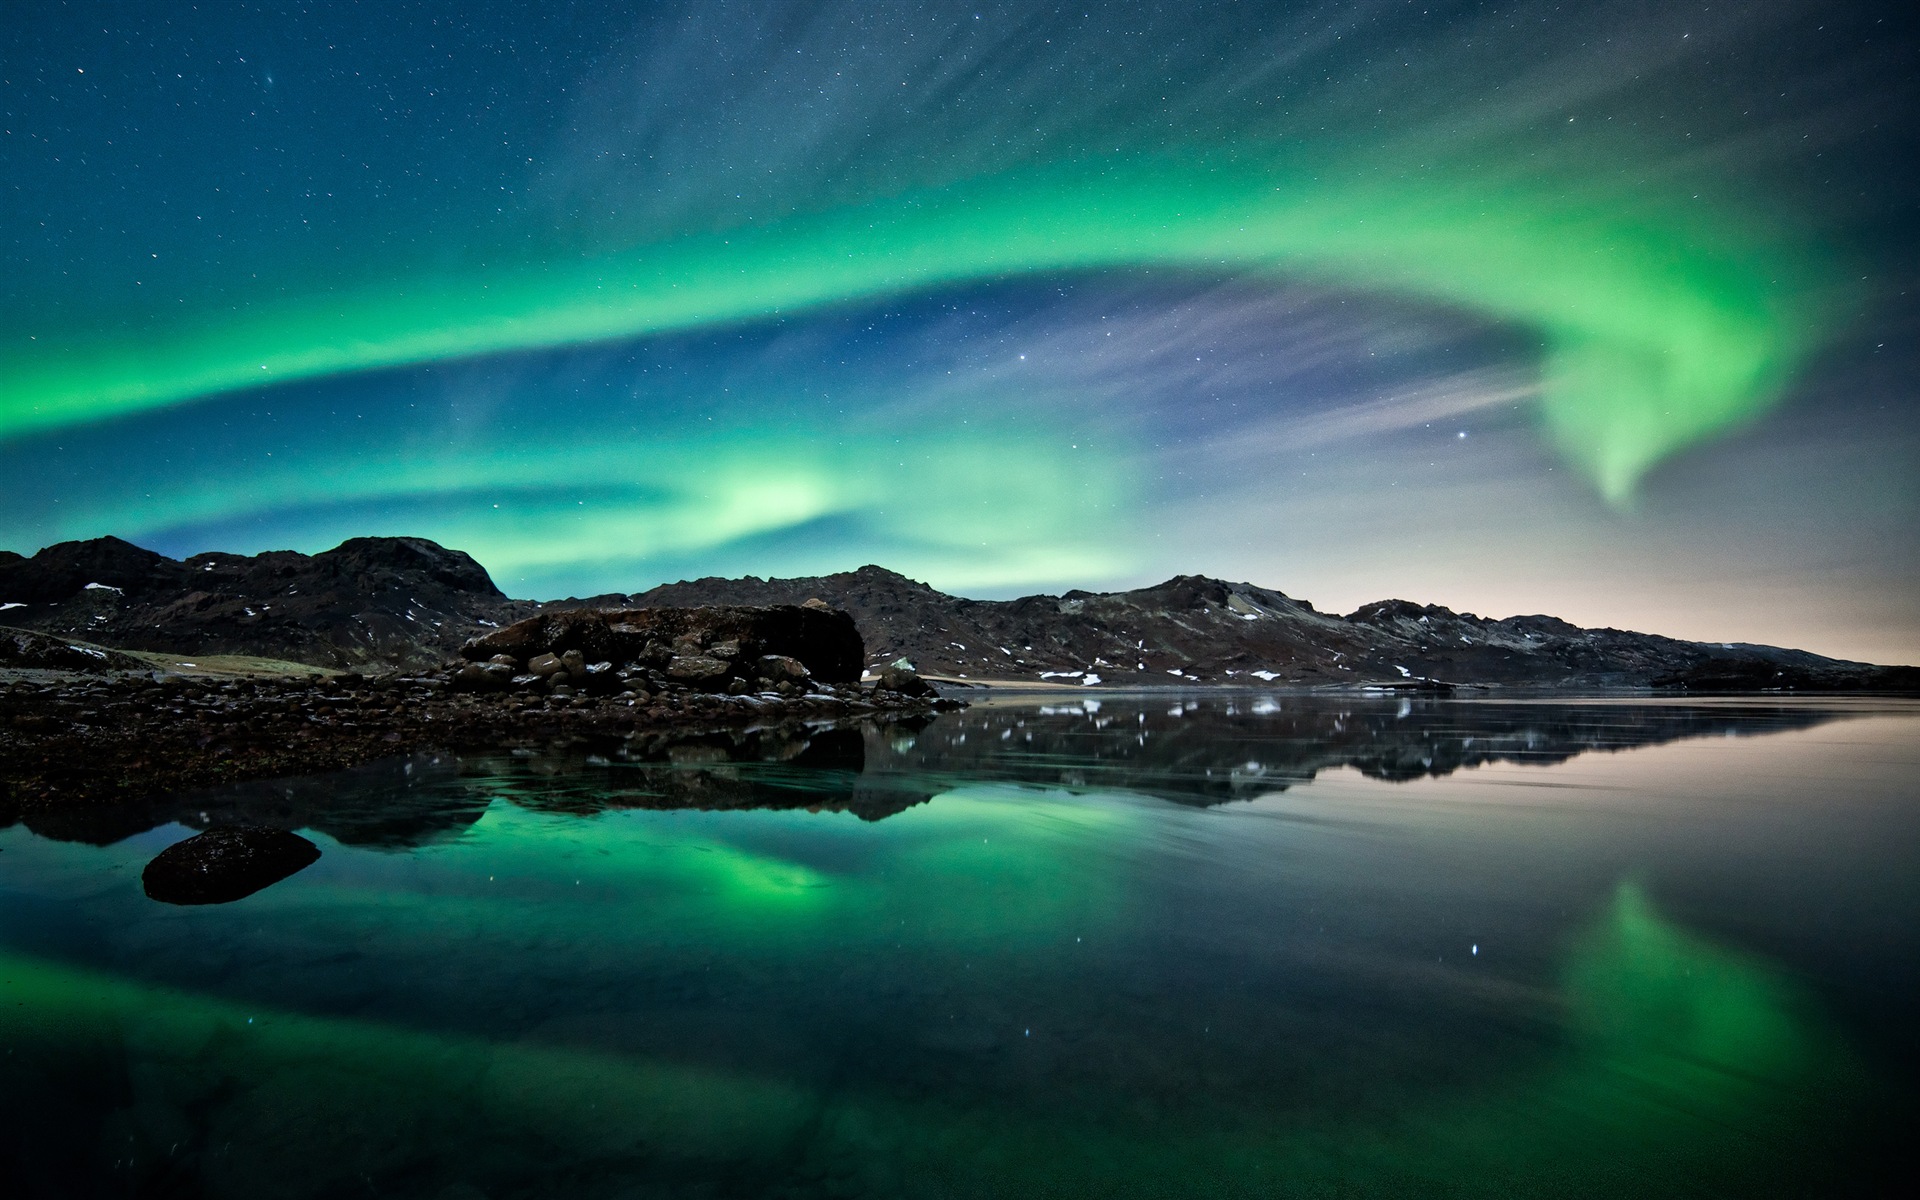 Natural wonders of the Northern Lights HD Wallpaper (1) #1 - 1920x1200